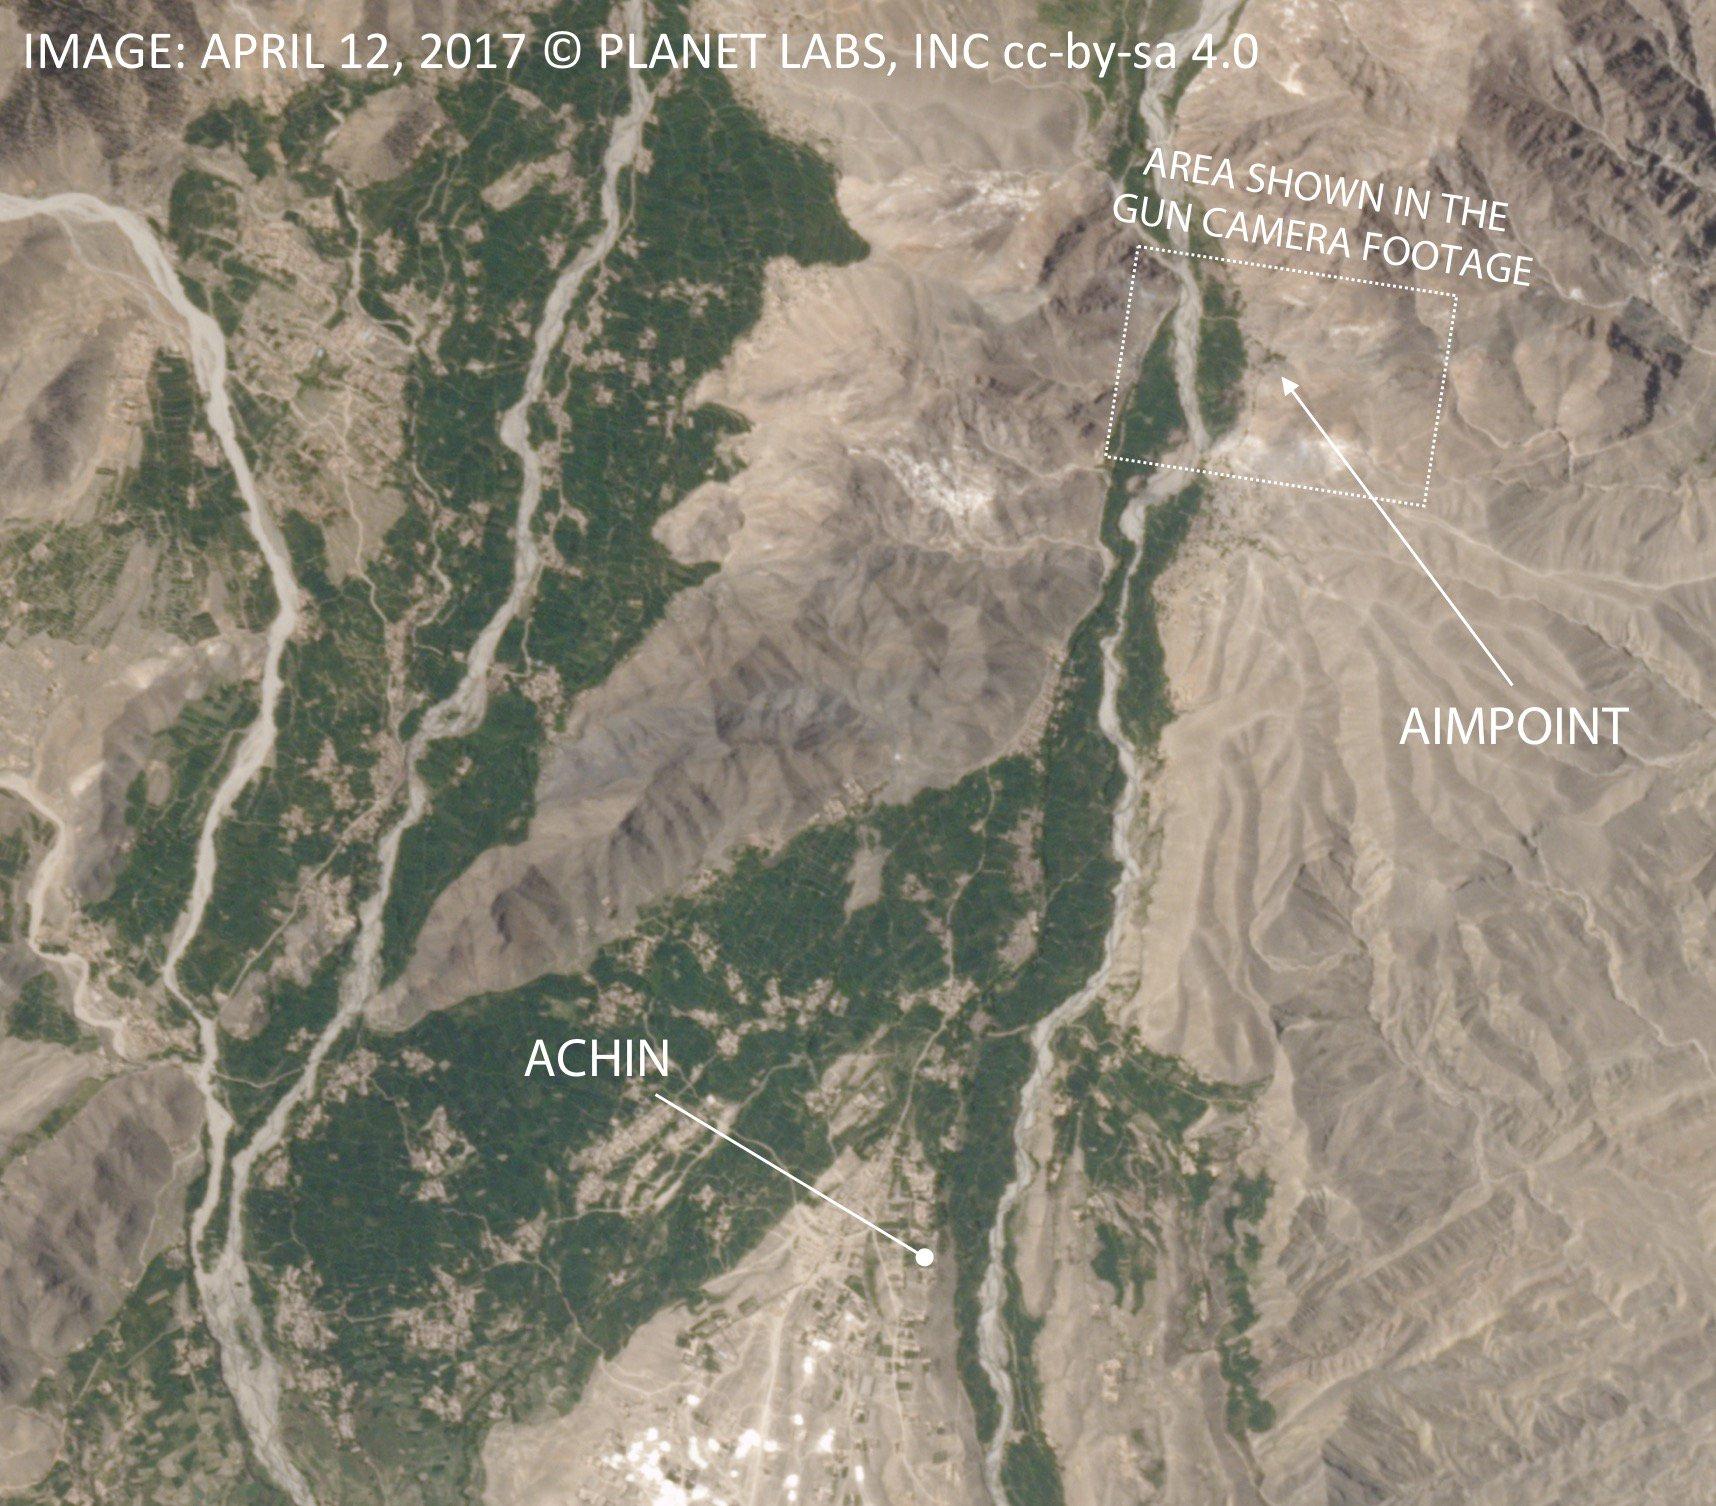 Satellite image of the area in Afghanistan where the US bombed. The greenery can be seen from above.